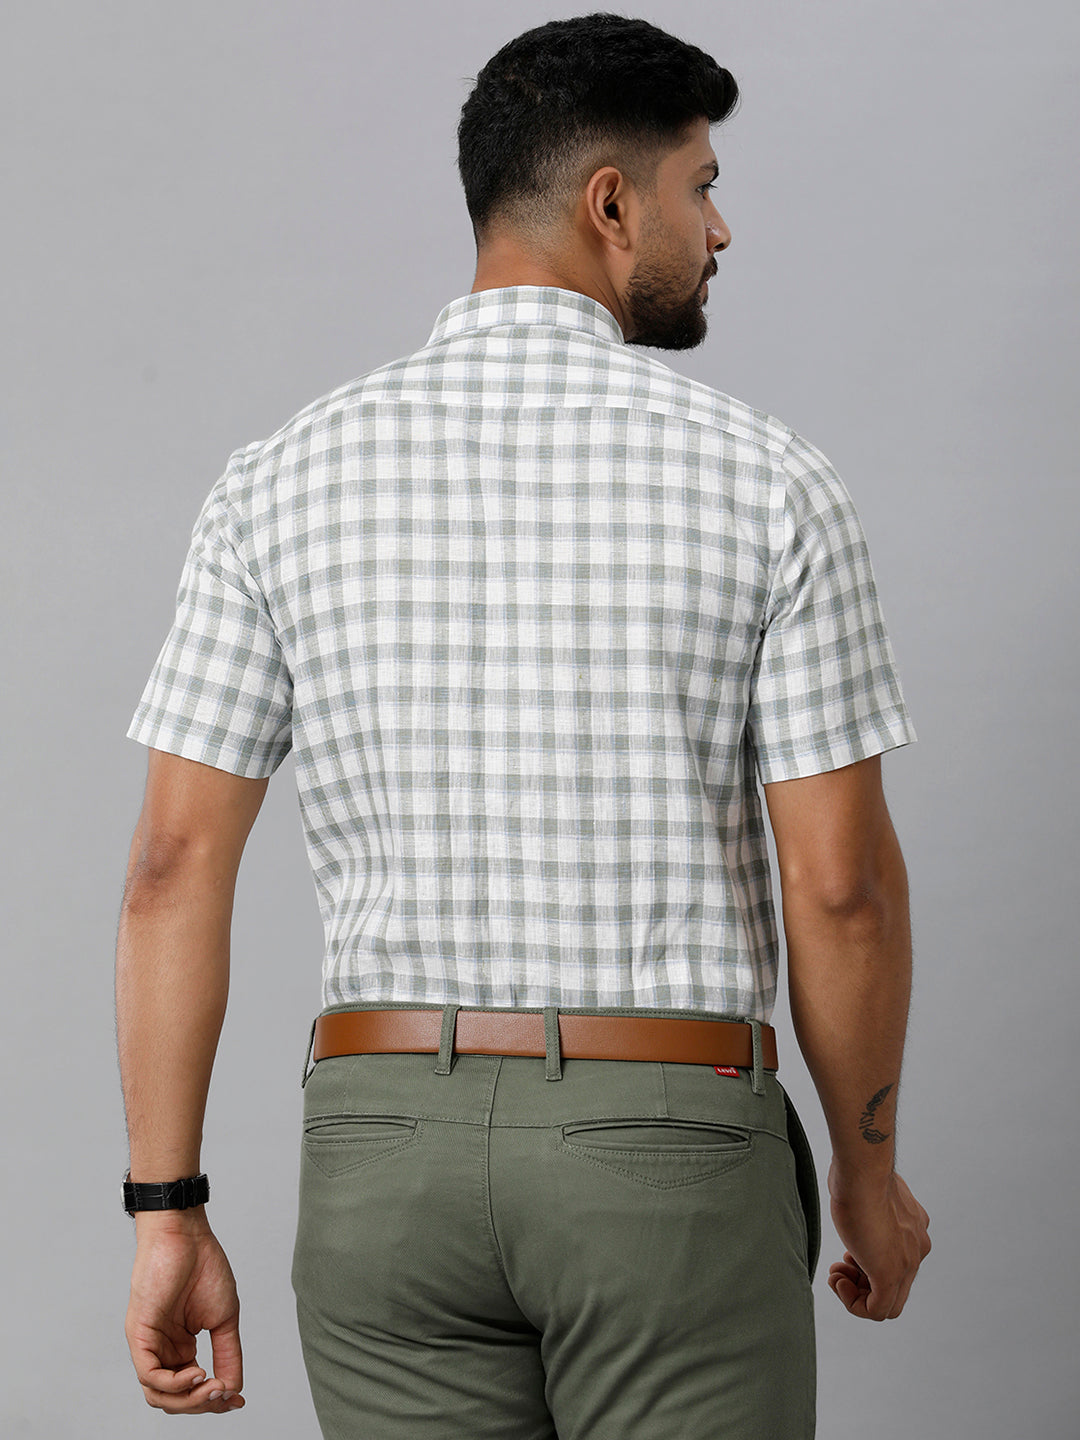 Mens Pure Linen Checked Half Sleeves Green & White Shirt LS56-Back view